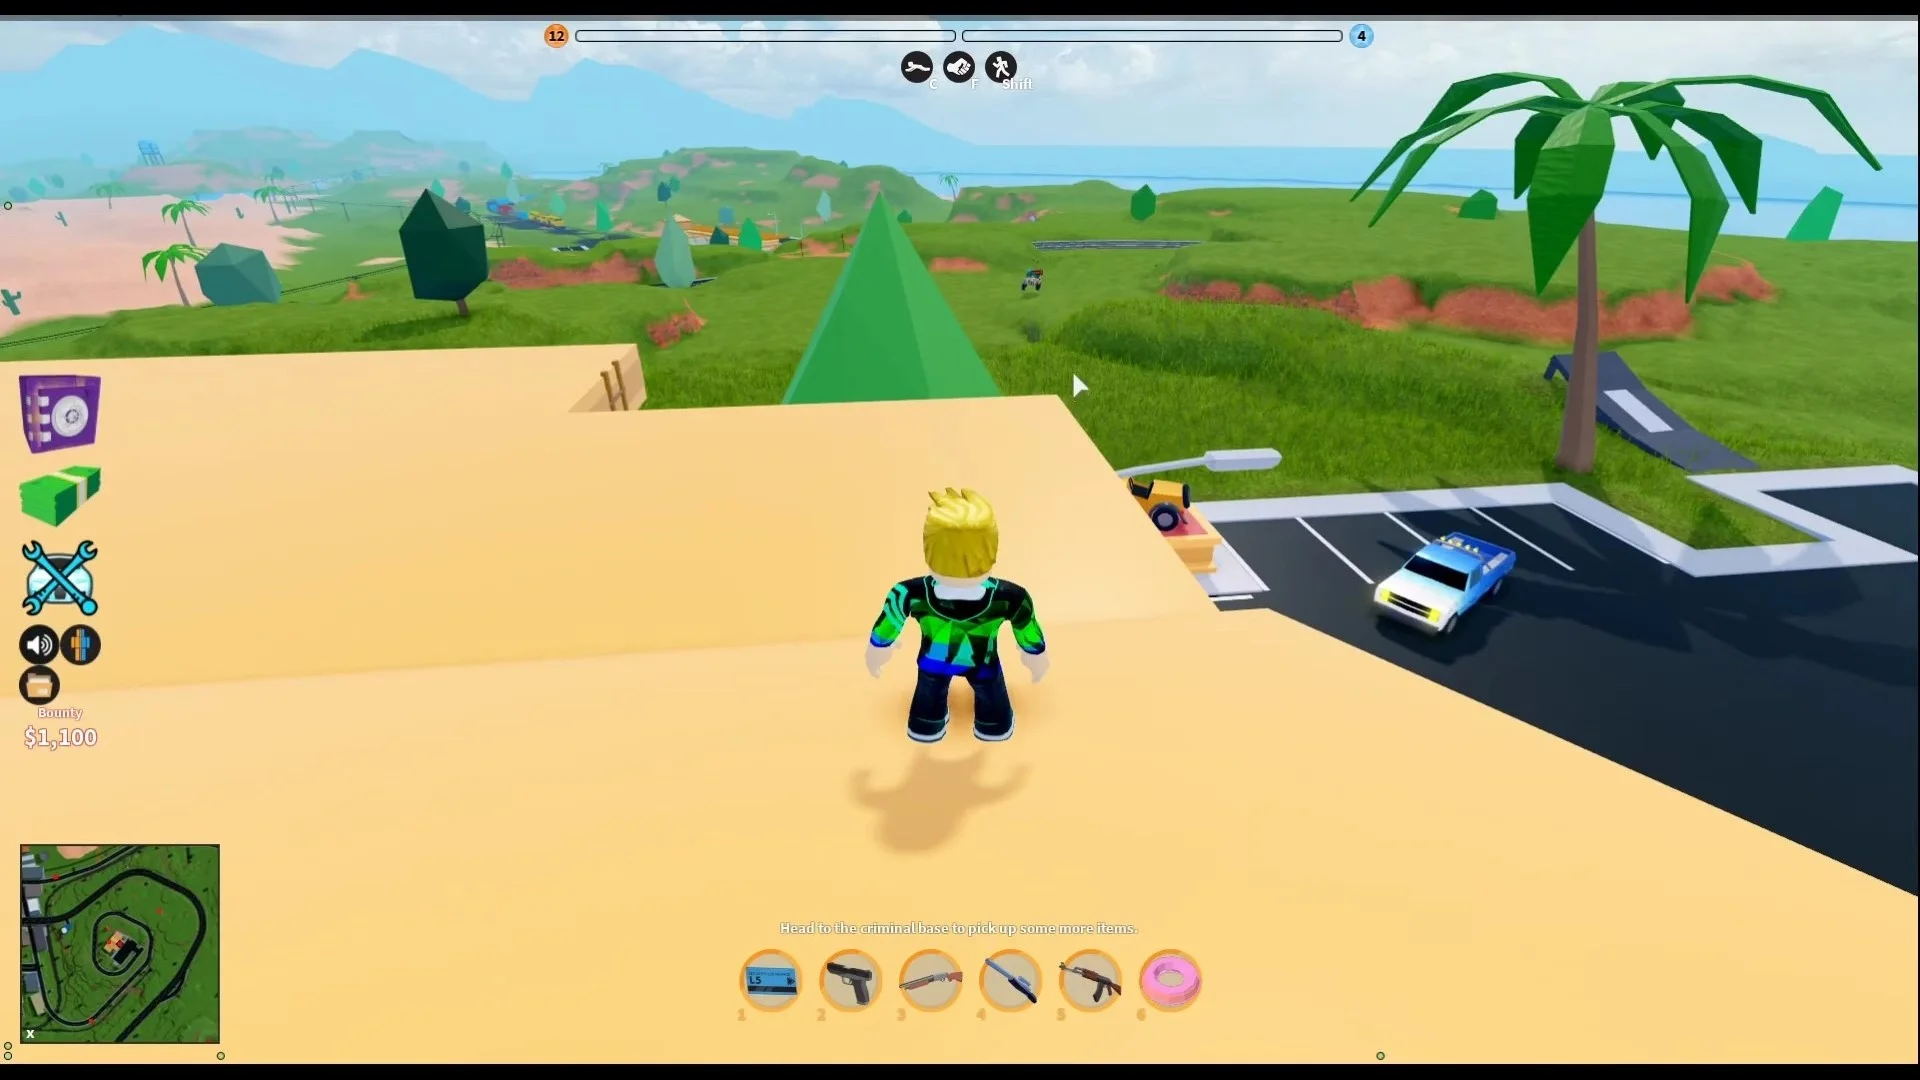 Roblox review